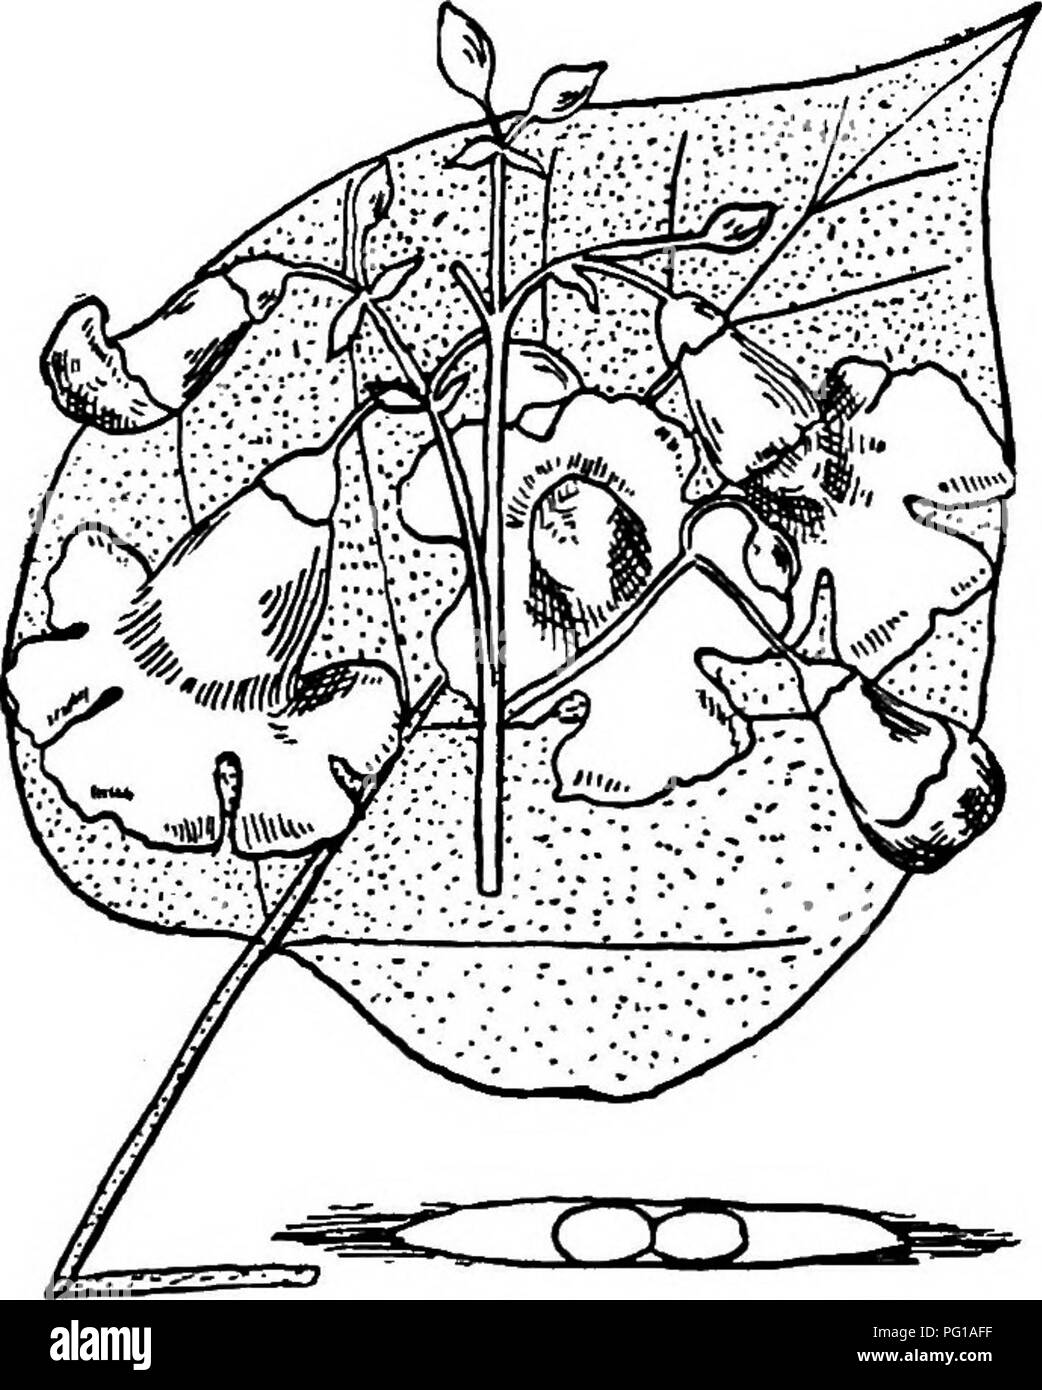 . North American trees : being descriptions and illustrations of the trees growing independently of cultivation in North America, north of Mexico and the West Indies . Trees. Fig. 758. — Catalpa. 2. WESTERN CATALPA — Catalpa spedosa Warder This is a tall tree with a straight, Uttle-branched trunk, of rich river bot- tom lands of southern Indiana, IlHnois, and Missouri, southward into Kentucky, Tennessee, and Arkansas, and has be- come naturalized about villages in Louisiana and Texas. It has received many common names as Hardy catalpa. Cigar tree, Indian bean, and Shawnee- wood. Its maximum he Stock Photo